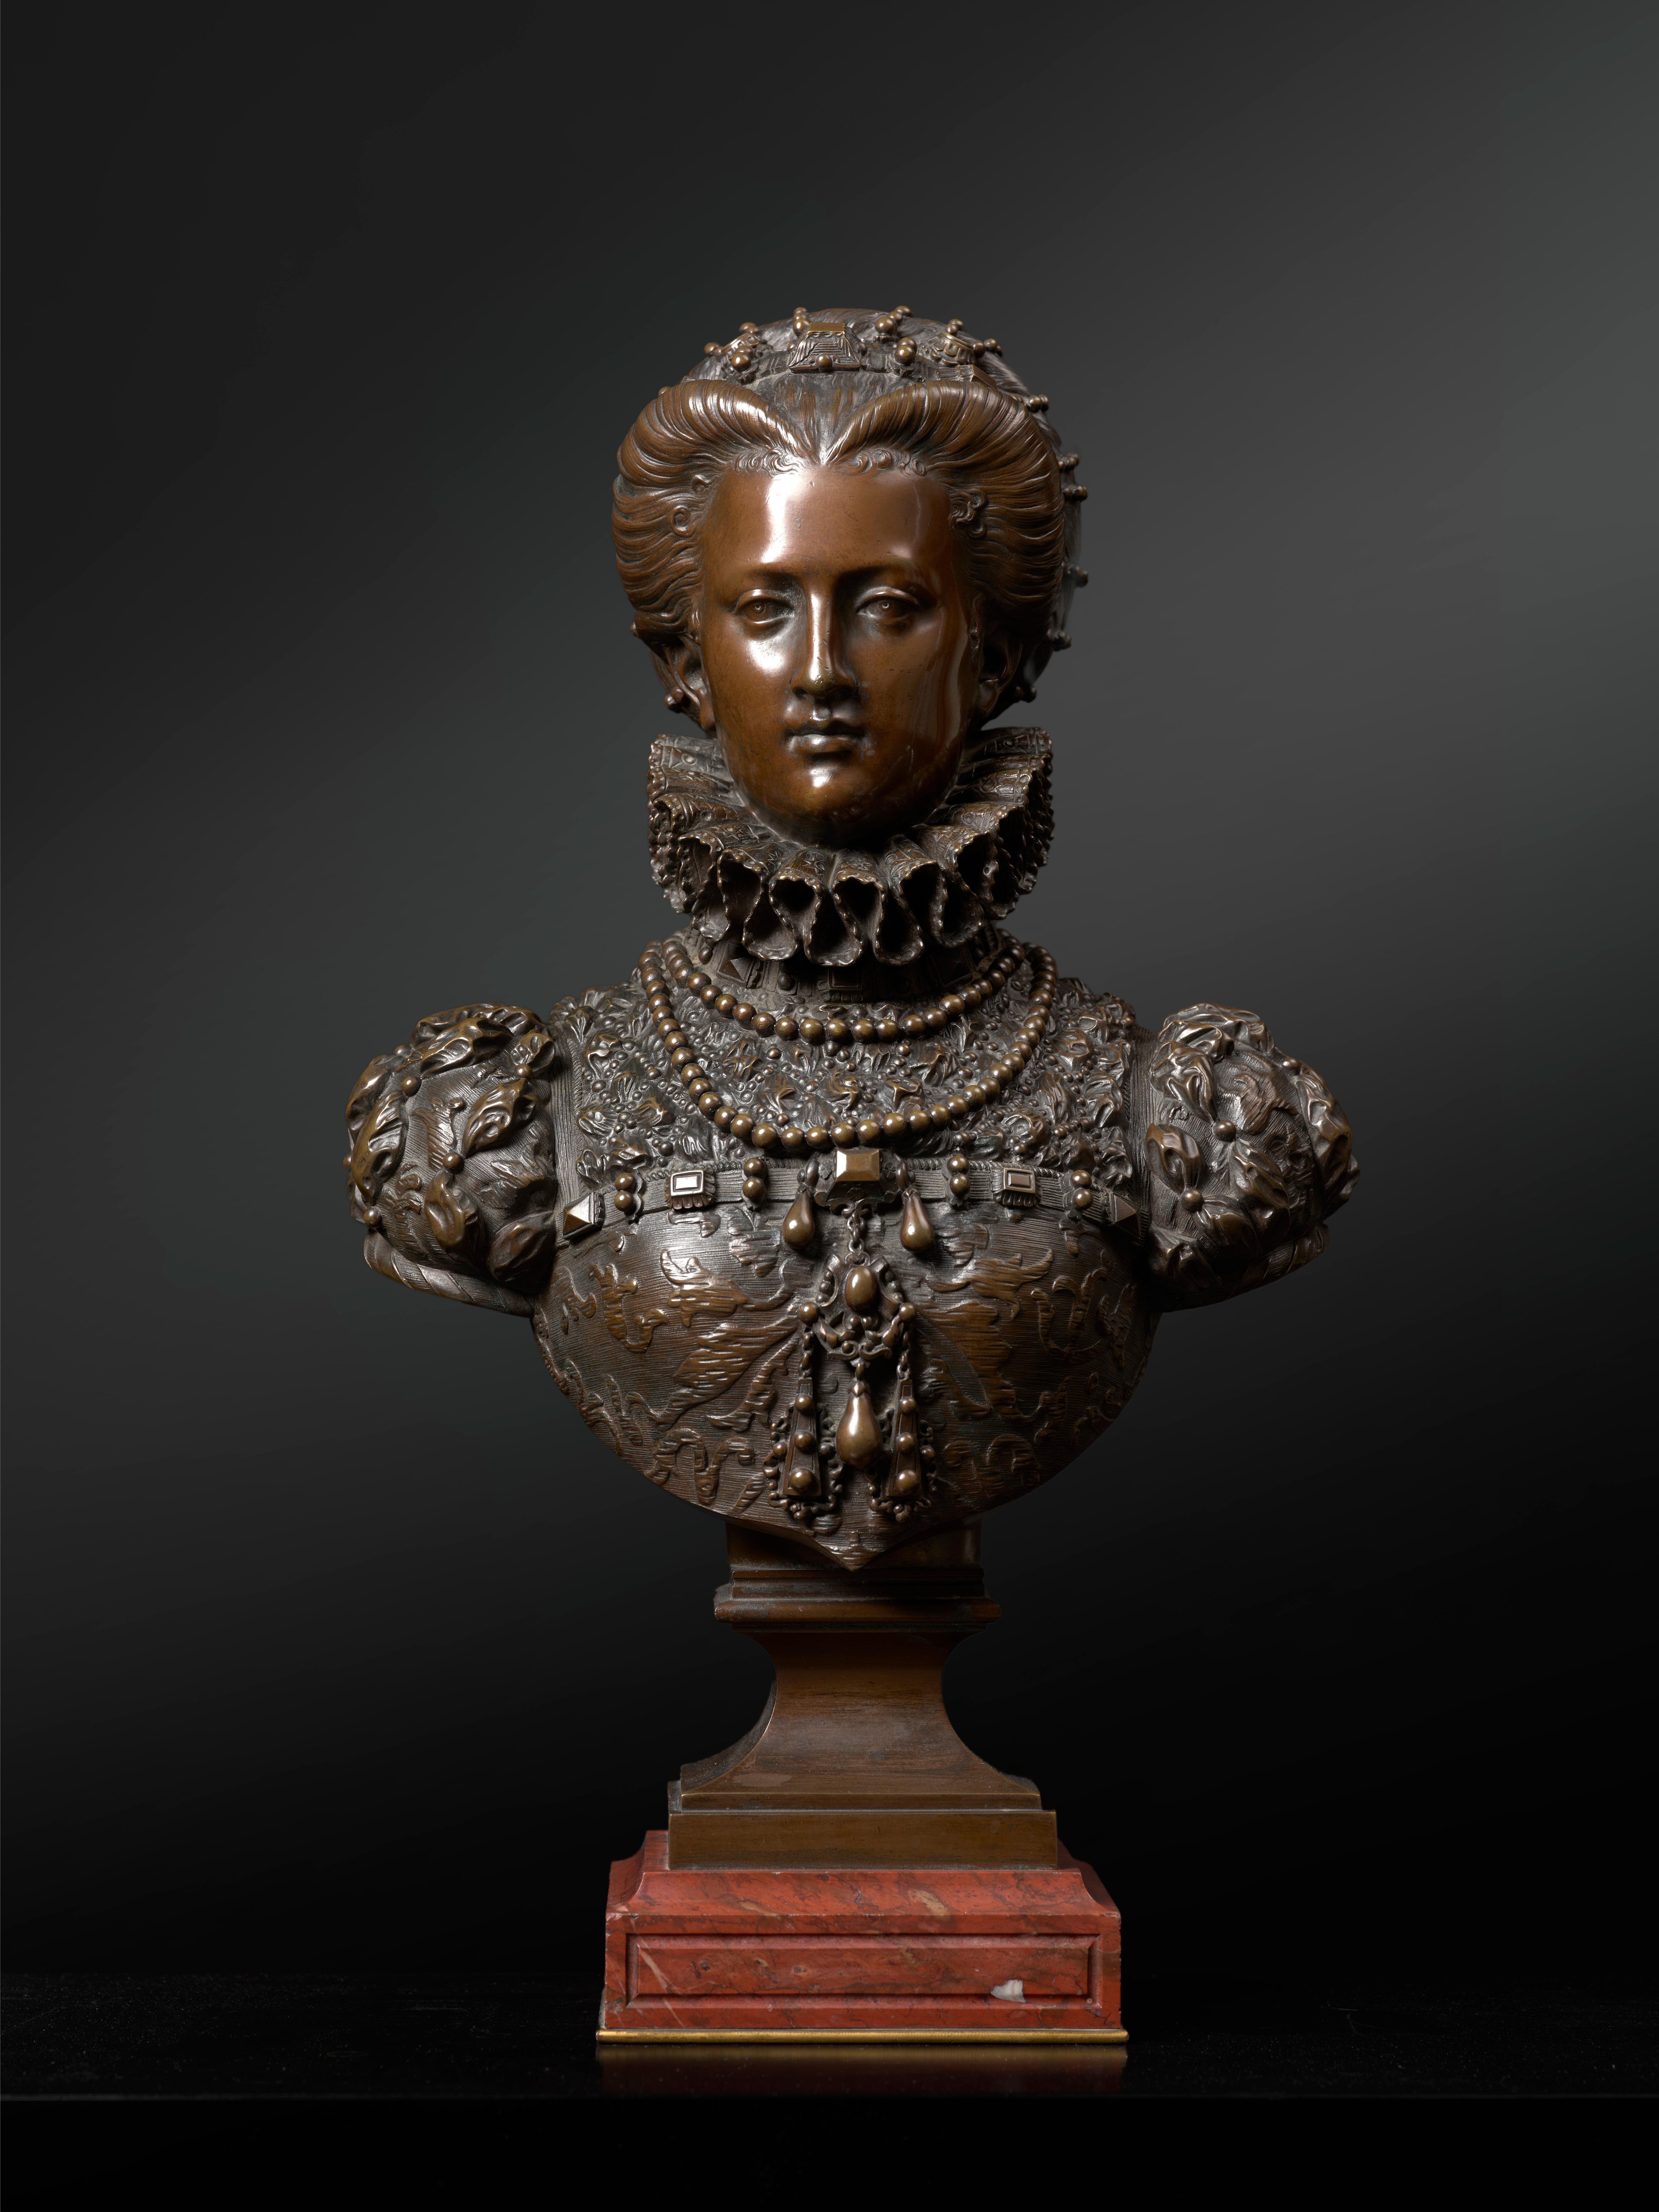 A near pair of superb bronzes of, Marie de Medici and Mary Queen of Scots, by the French sculptor Mathurin Moreau 1822-1912 the bronzes date around 1880, in first state original condition, without restorations.